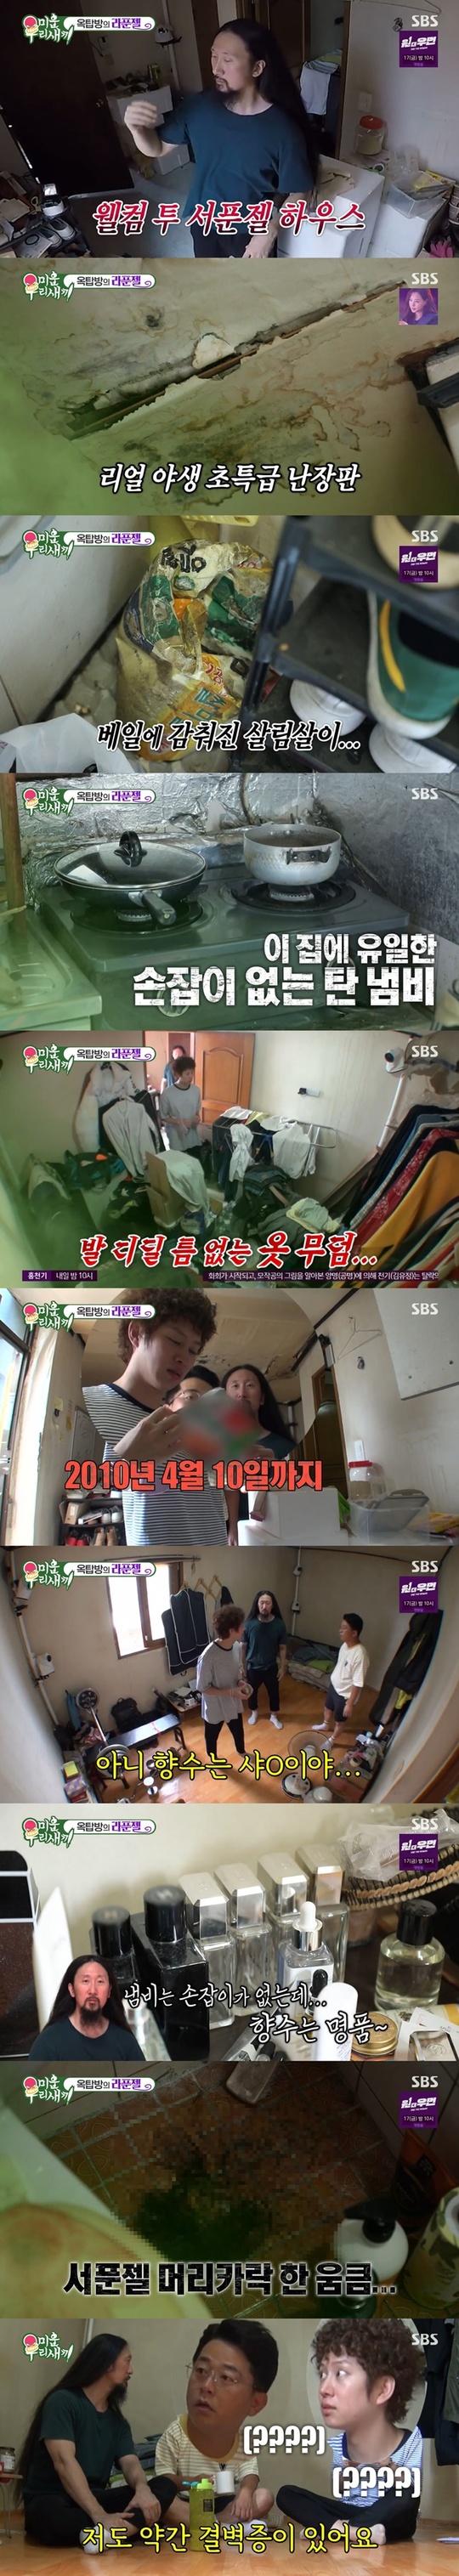 Seo Nam-yong reveals shocking The rooftop visualOn SBS Ugly Our Little broadcast on September 12, Kim Jun-ho and Kim Hee-chul, who came to clean the Seo Nam-yong house, were drawn.Kim Jun-ho and Kim Hee-chul visited the 18th KBS public offering to organize the rooftop of the comedian Seo Nam-yong.The shocking Rooftop of Seo Nam-yong was then unveiled.From the entrance, rusty chains, rusty bells, rusty bicycles with windy tires, as well as broken ceilings and molds as soon as they opened the front door of the house.In the kitchen, which was covered with silver foil on the wall, there was a handleless pot and a rotten rice bag bag.When embarrassed Kim Hee-chul asked, Do you have slippers?, Seo Nam-yong replied coolly, You can come in with shoes.Kim Hee-chul opened the door of the dressing room and a grave of clothes appeared without a break. Even a strange smell.In addition, Kim Jun-ho opened the refrigerator door and piled up a lot of food that lost its shape. Kim Jun-ho was embarrassed, Im going to be sick.Kim Hee-chul then asked, Since I was a fan of the Seo Nam-yong brother since the Fox Club, I am worried, can I open a cupboard?Inside the cupboard, ramen with a shelf life of up to April 11, 2010 was found; Kim Hee-chul was stunned to see it since it was born after the expiration date.The shelf life of another bibim ramen was in 2007. Park Joo-mi laughed, Our second was born in 2007.The gas range hood was dead with clumps of salted worms stuck in the oil-stained, while MC Seo Jang-hoon, who was watching VCR, sighed, Its hard to see.The room was in a pretty pleasant condition, but the dumbbells in the room rusted and left marks on the floor.Looking around the room, Kim Jun-ho found a full Perfume on one side; Kim Hee-chul, who saw it, laughed, Perfume is all Chanel.Its 46 for 500; its about 14 or 5 years since I came to Seoul and lived here only, Seo Nam-yong said of the house.Seo Nam-yong then prepared the flour for the two guests.When Kim Hee-chul was afraid to eat this, Seo Nam-yong replied, I bought water.But Seo Nam-yong, in addition to bottled water and flour, took out honey, which has a shelf life of up to 2016, and shocked everyone.